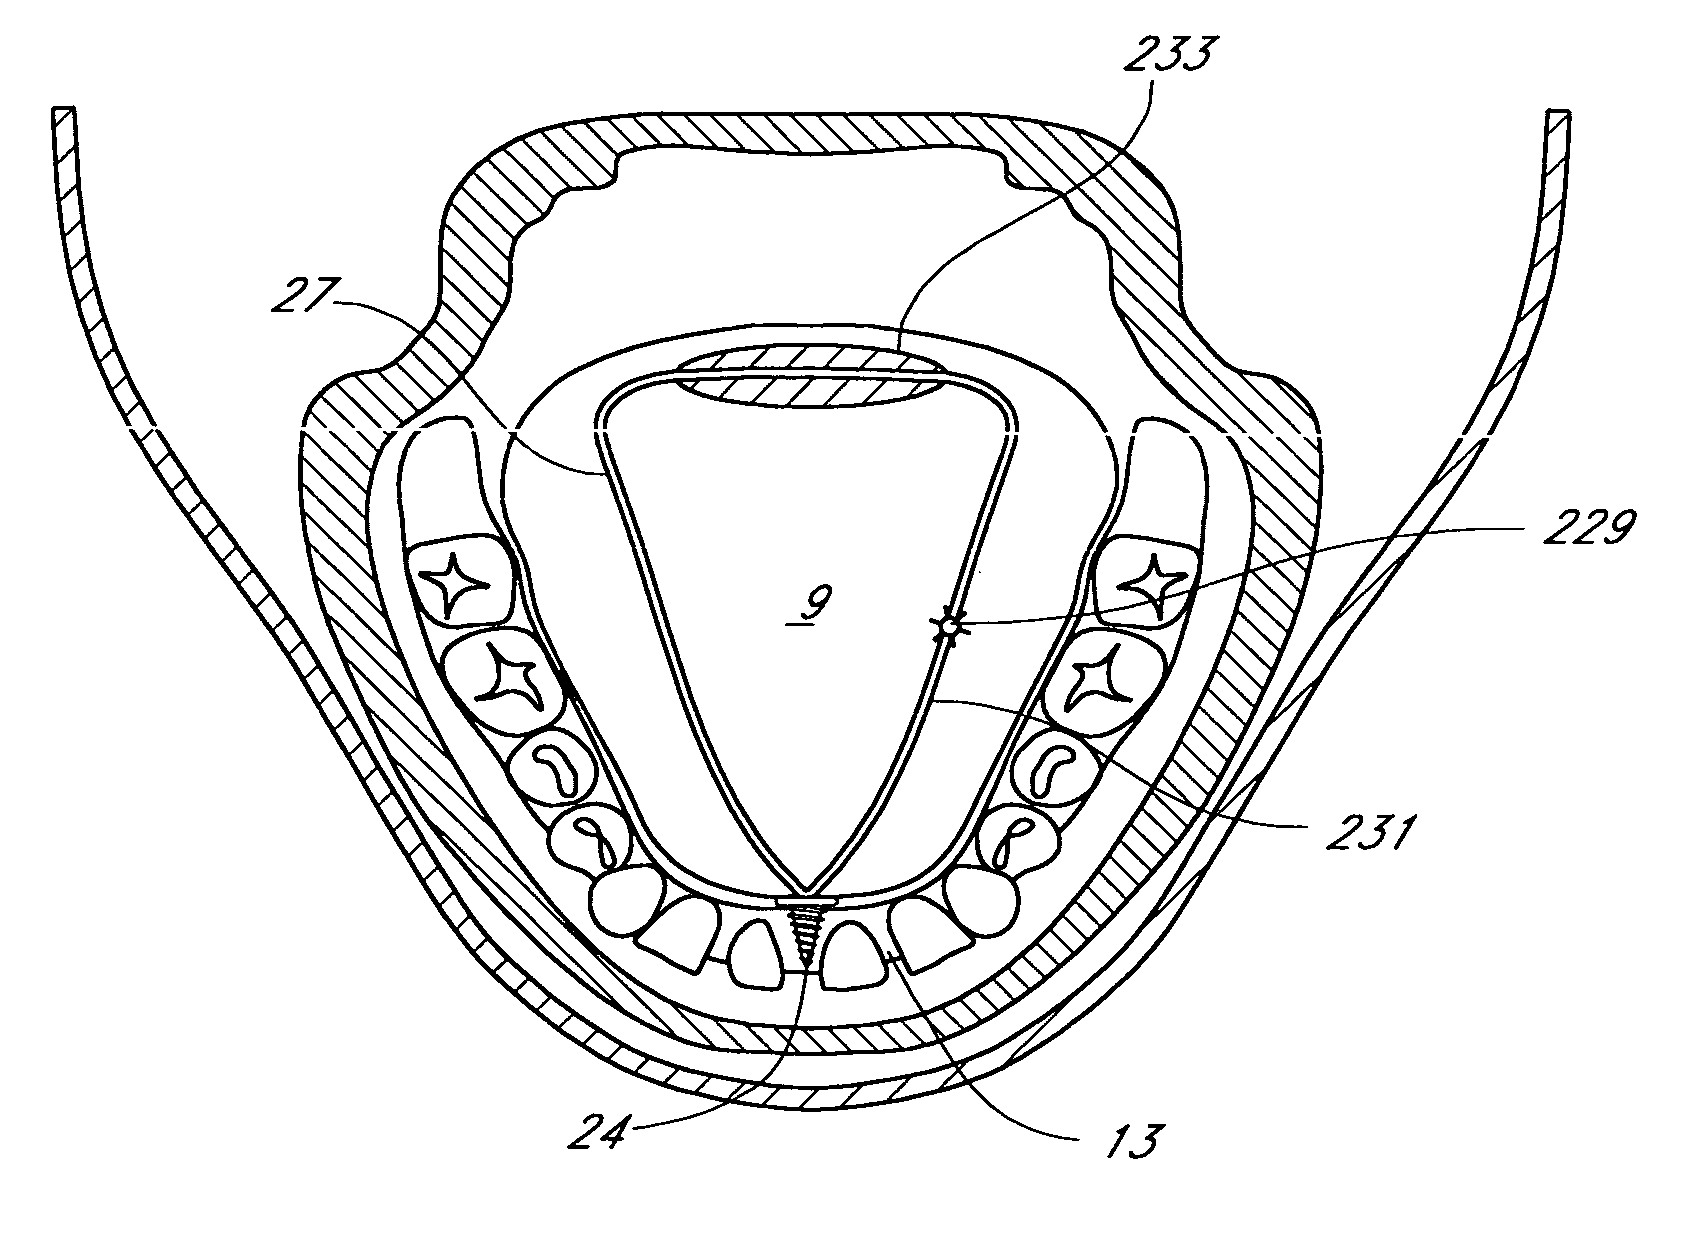 Tissue anchoring system for percutaneous glossoplasty